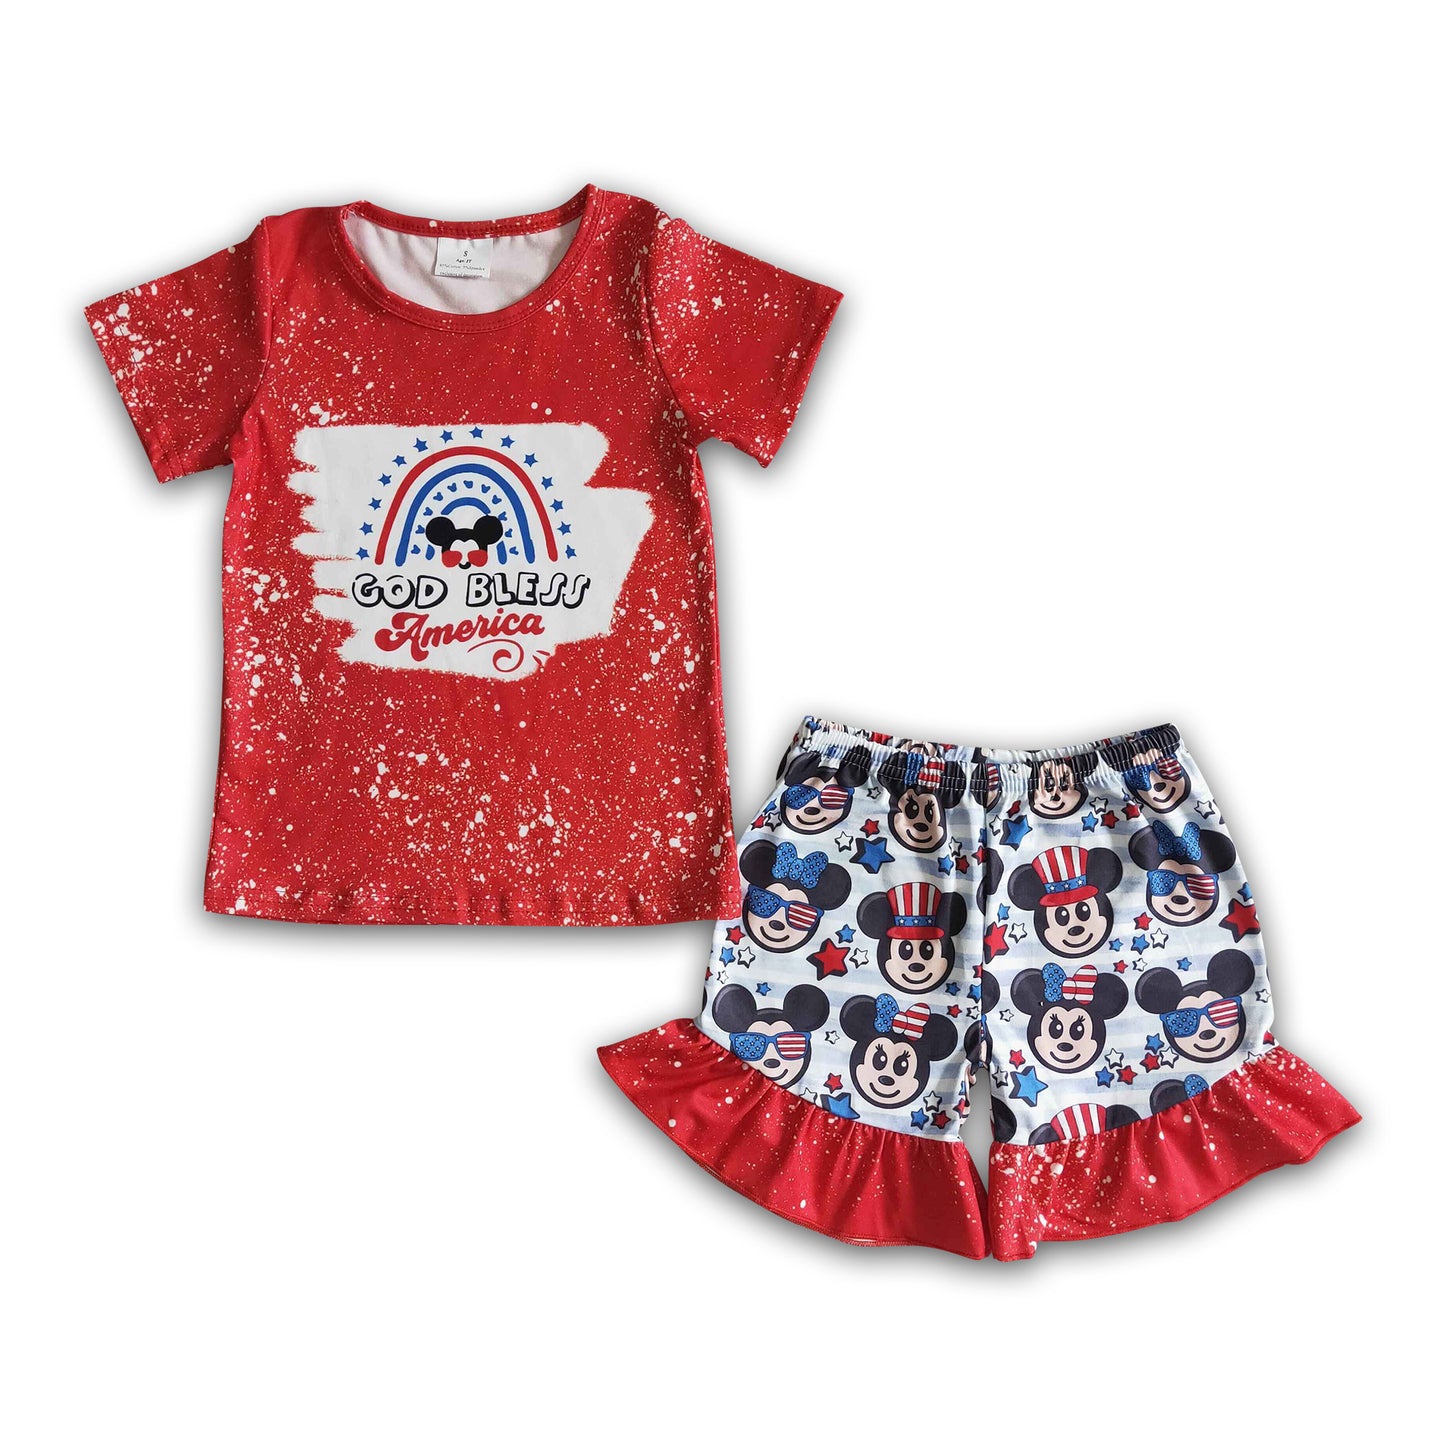 God bless America cute girls 4th of july clothing